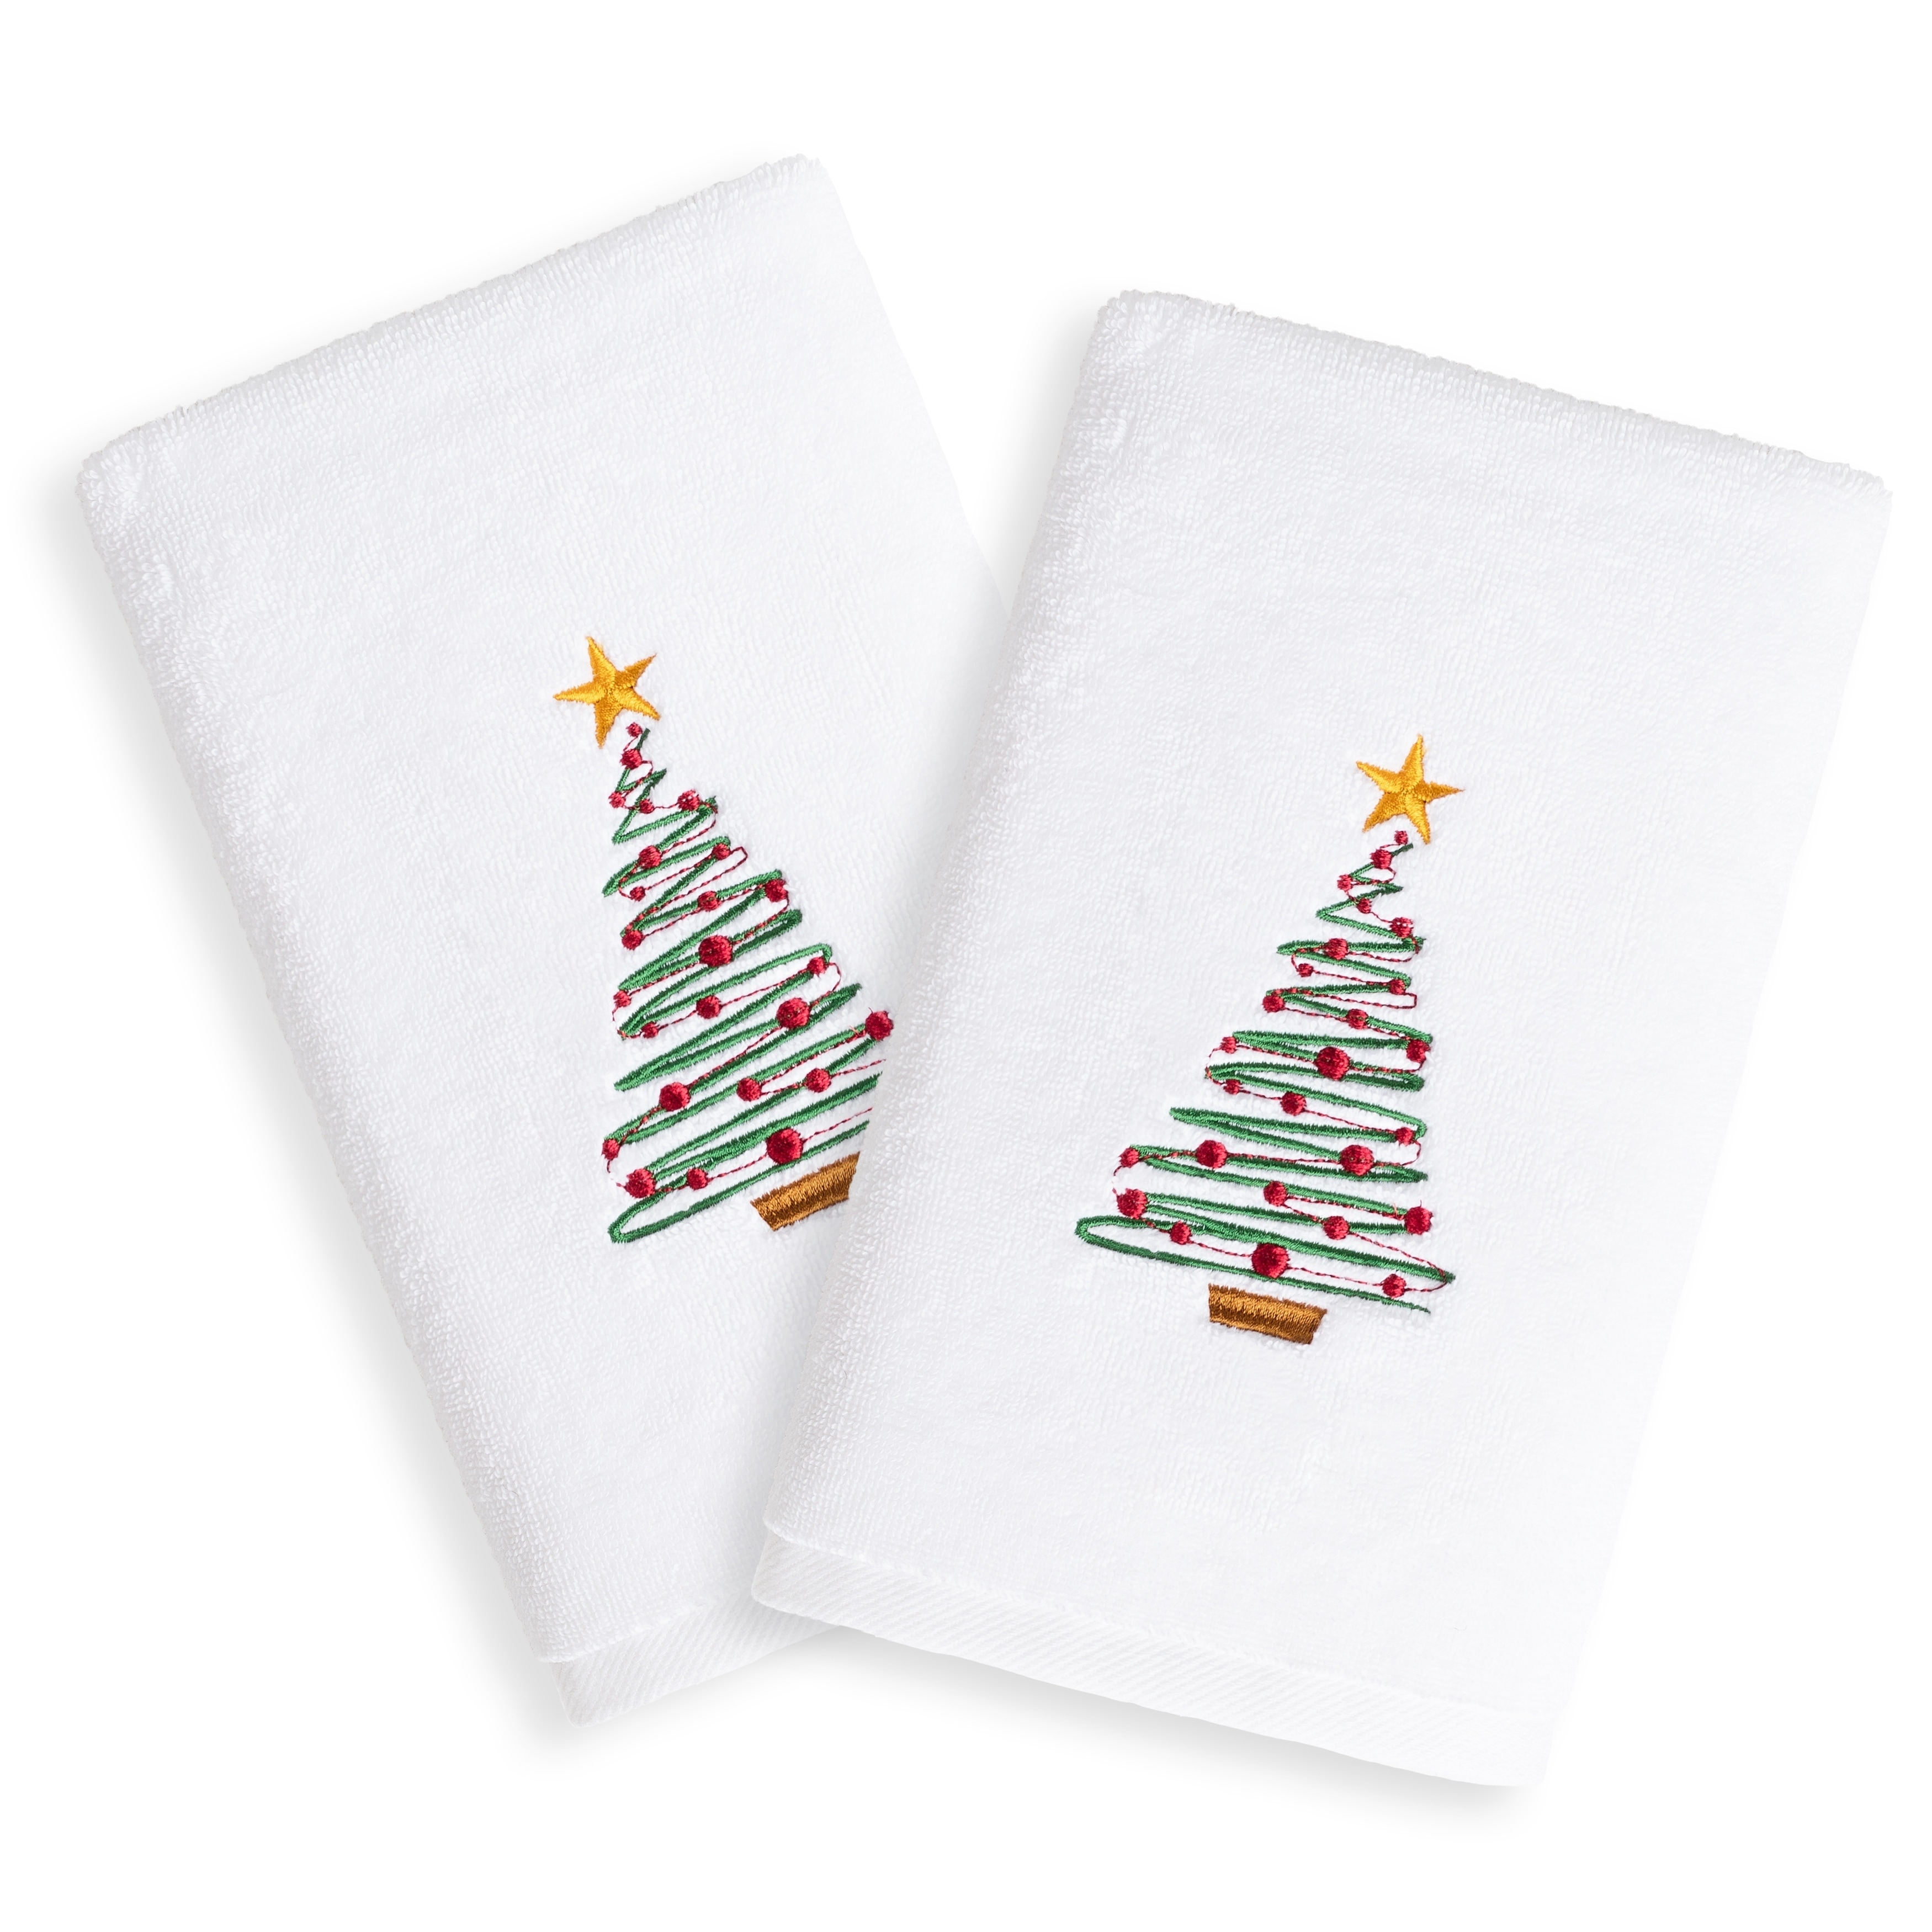 Embroidered Christmas Kitchen Towels, Decorative Holiday Dish Towels Set of  2